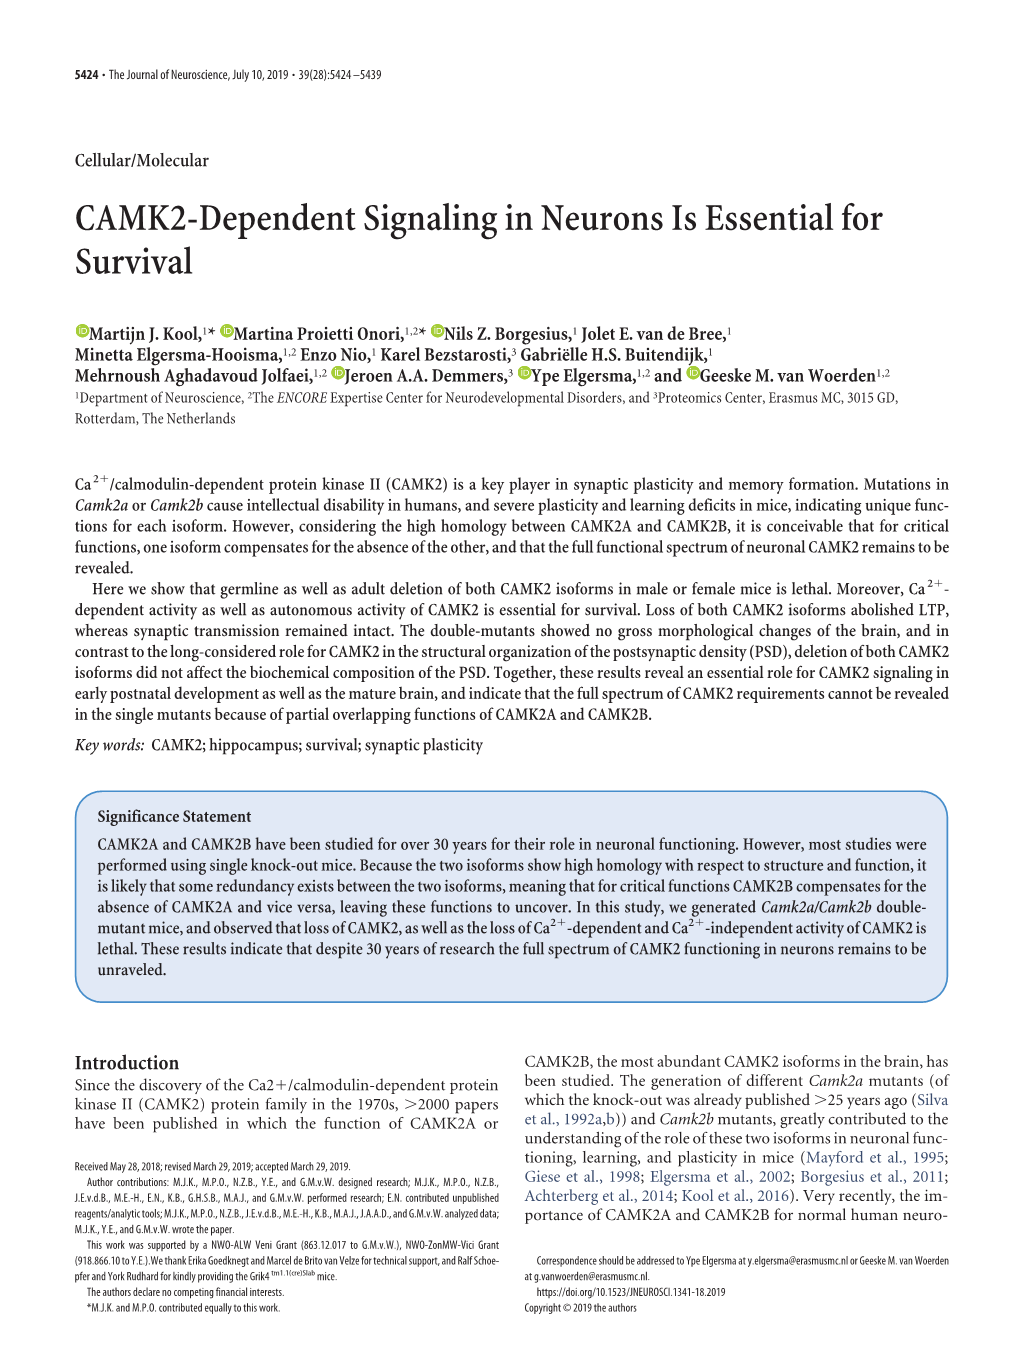 CAMK2-Dependent Signaling in Neurons Is Essential for Survival